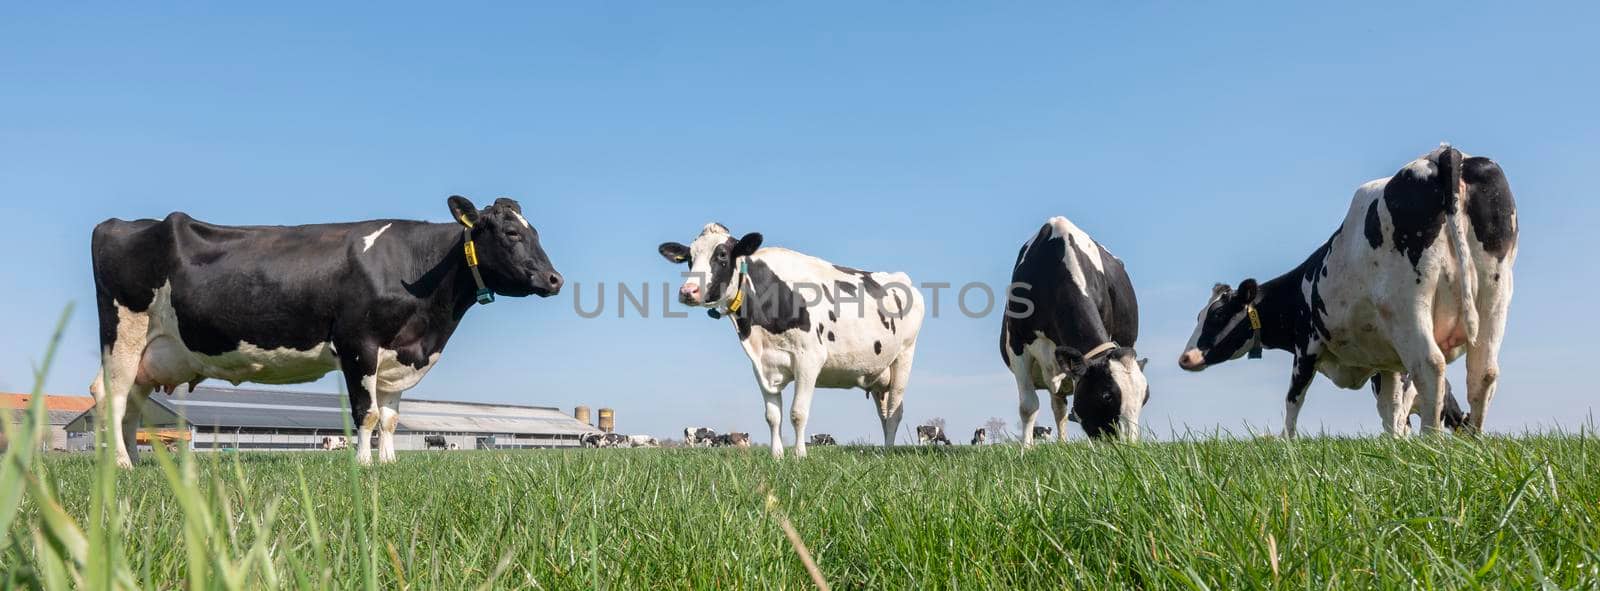 black and white spotted cows in green meadow near farm in dutch province of zeeland by ahavelaar